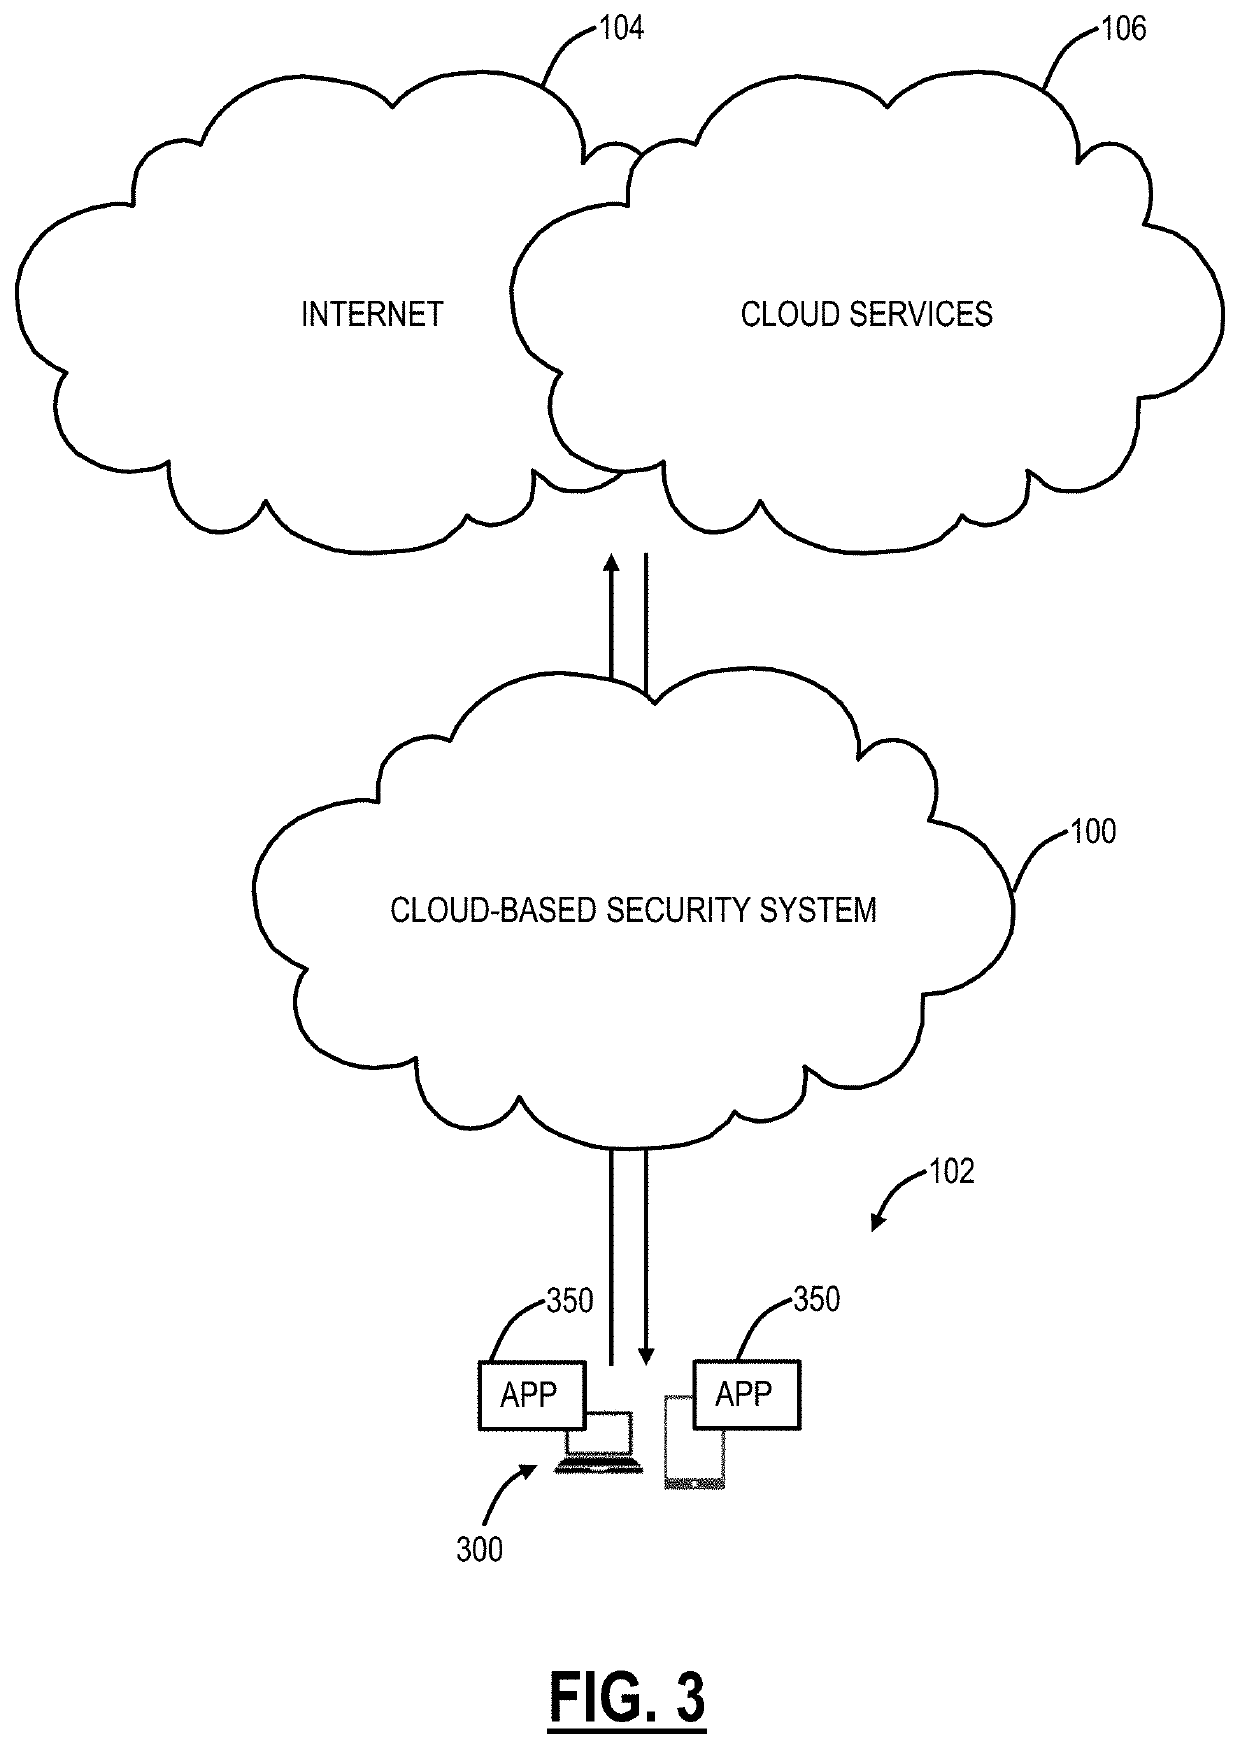 Utilizing endpoint security posture, identification, and remote attestation for restricting private application access